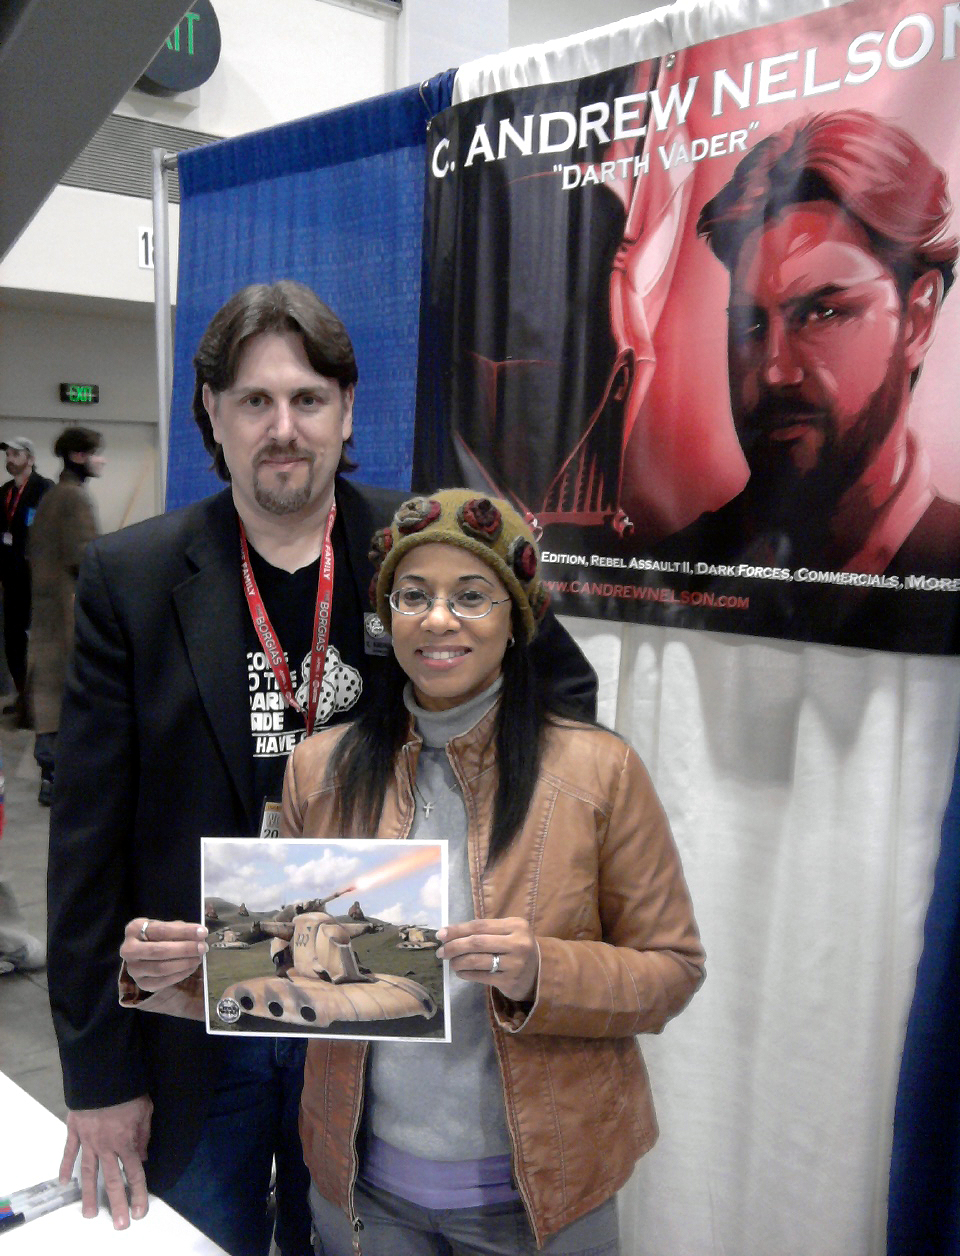 Veronica Loud with husband C. Andrew Nelson at WonderCon 2011. Veronica served as a VFX photographer for the ground battle sequence of 